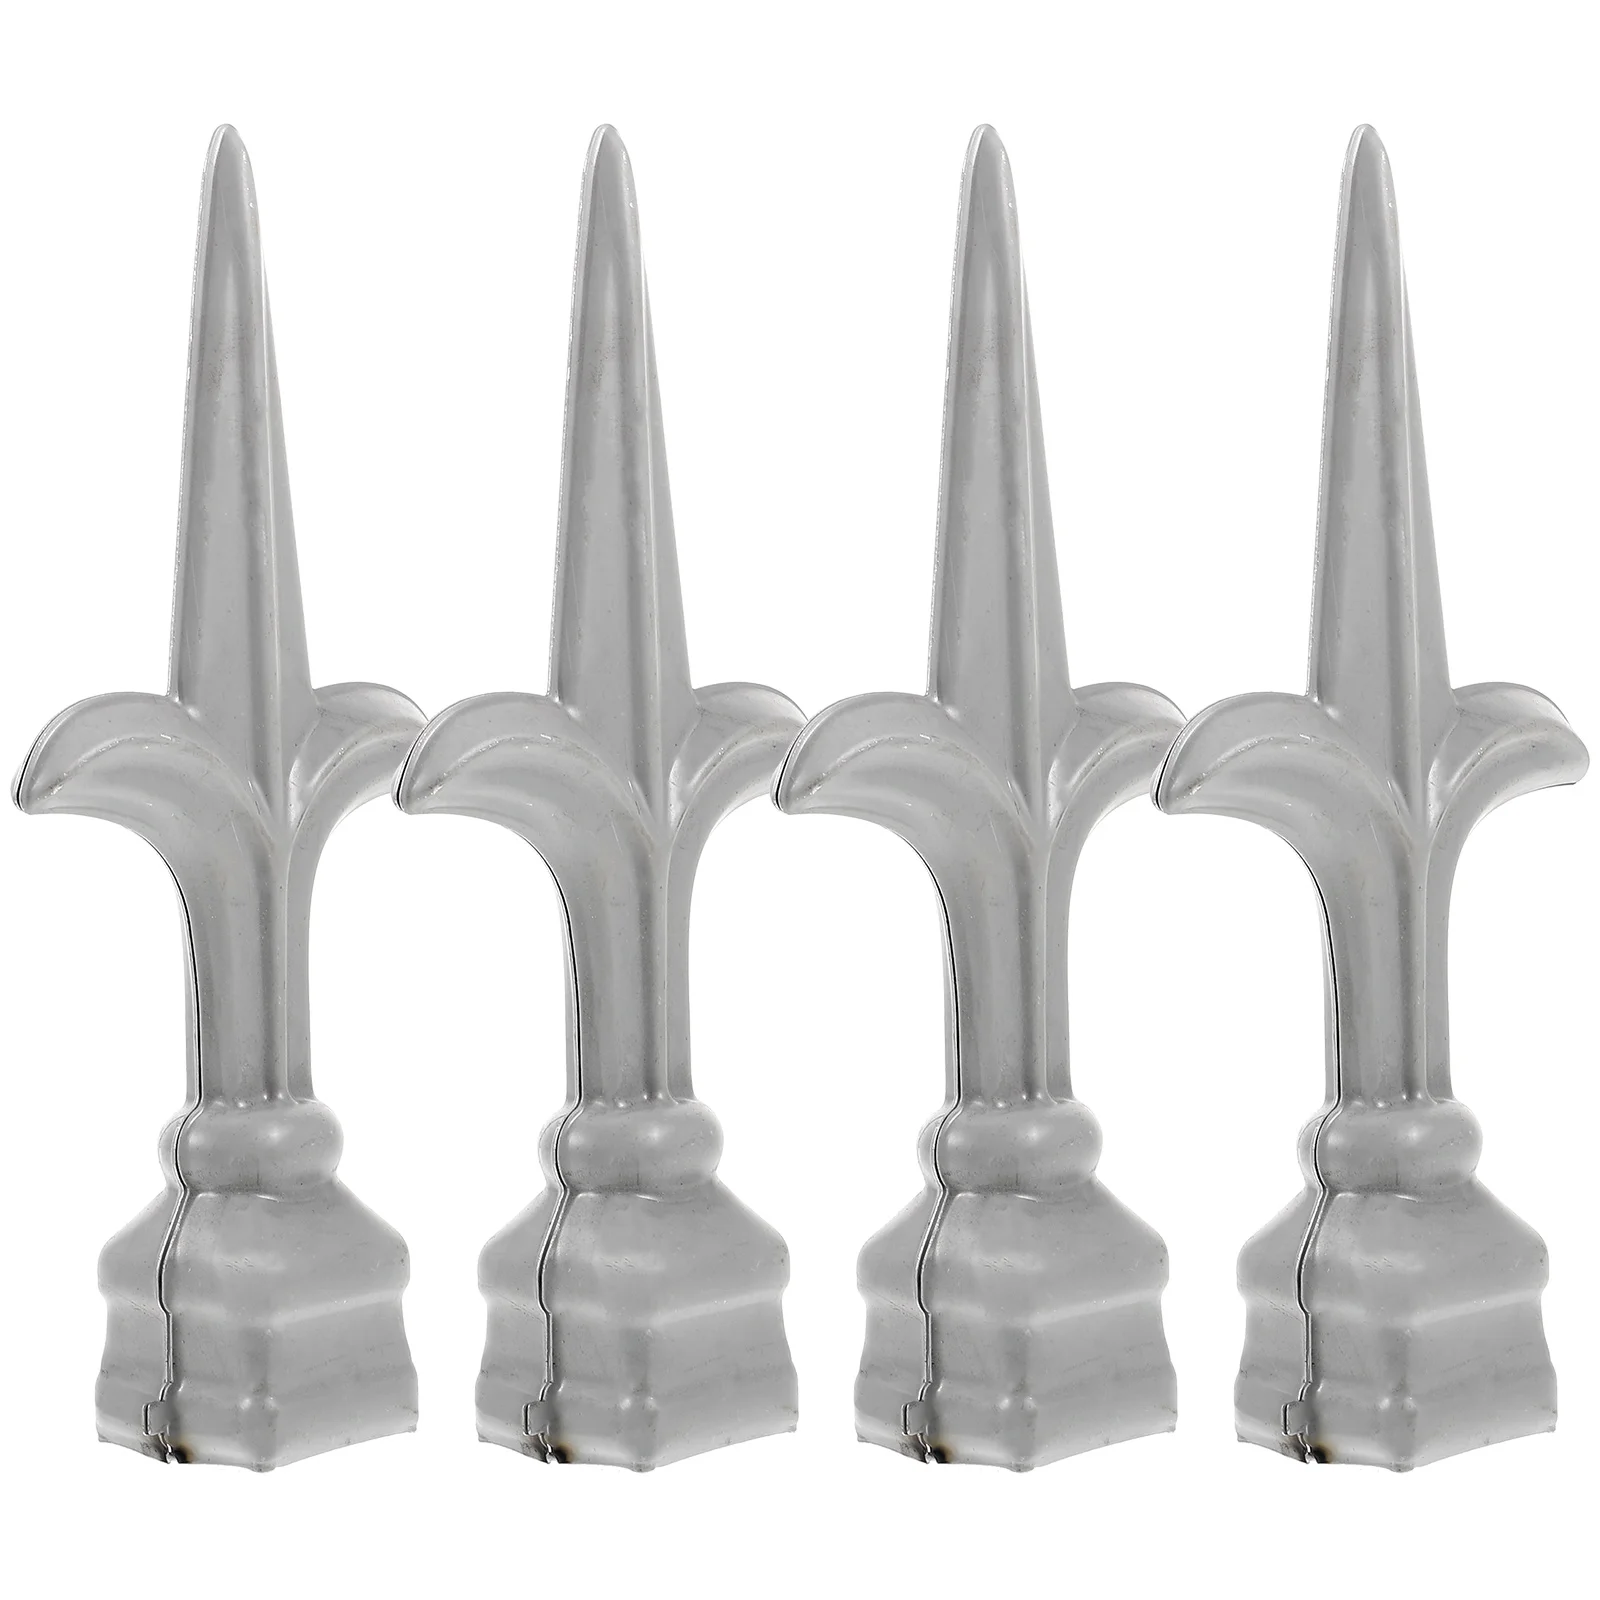 

4 Pcs Decor Garden Fence Finial Outdoor Lawn Decorations Armrest Metal Post Finials Gate Iron Topper Accessory Baby